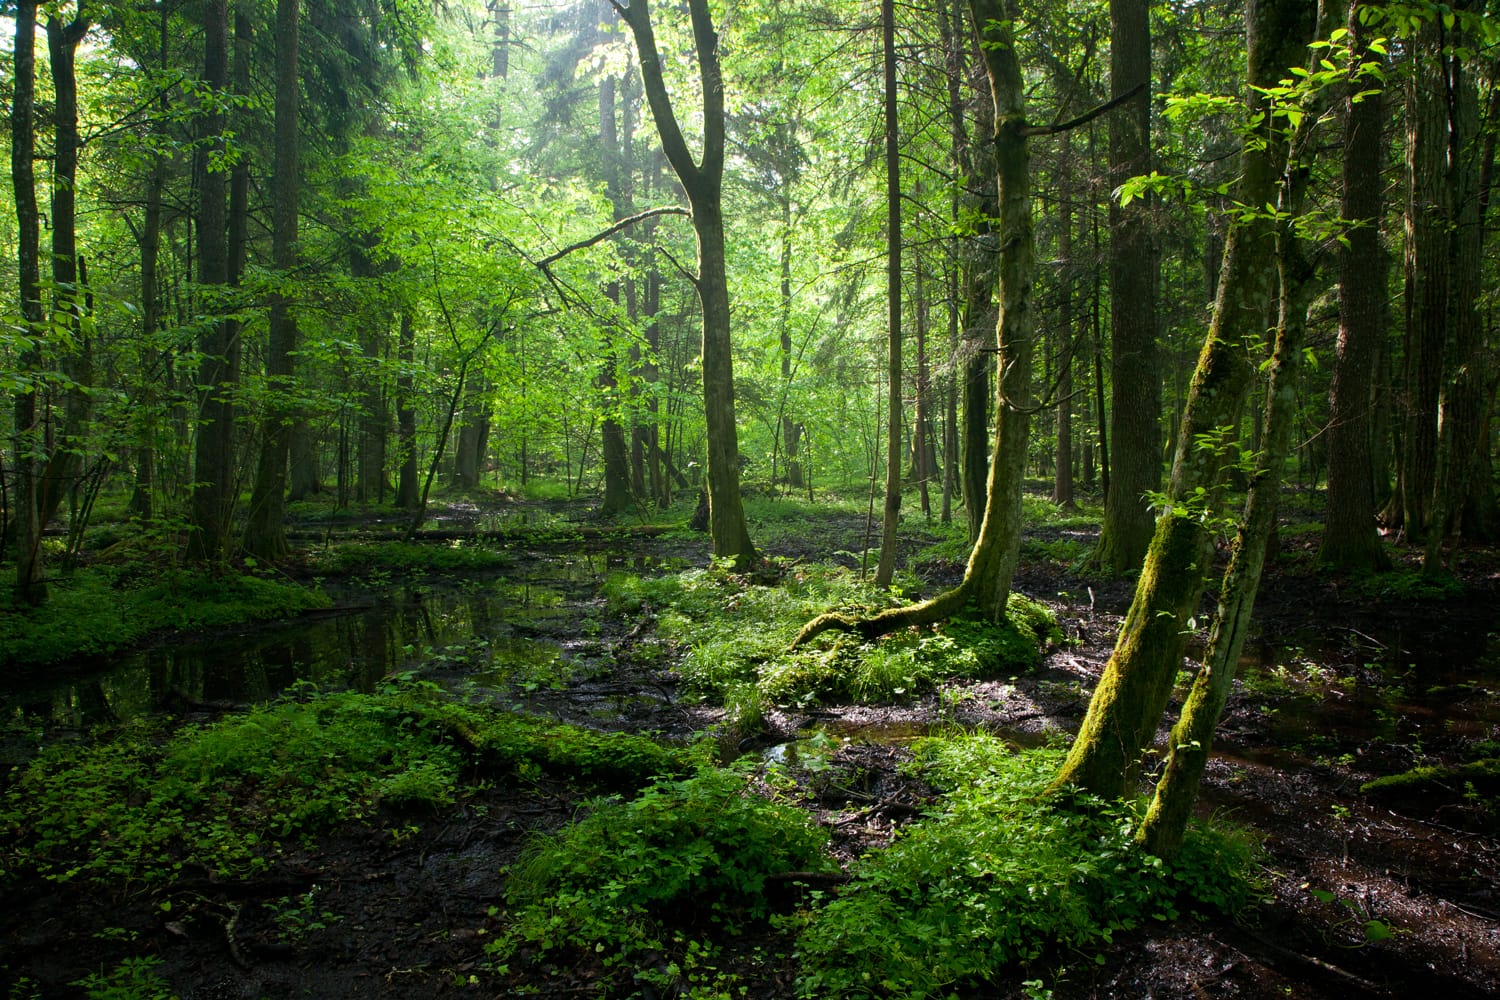 Bialowieza Forest in Poland and Belarus